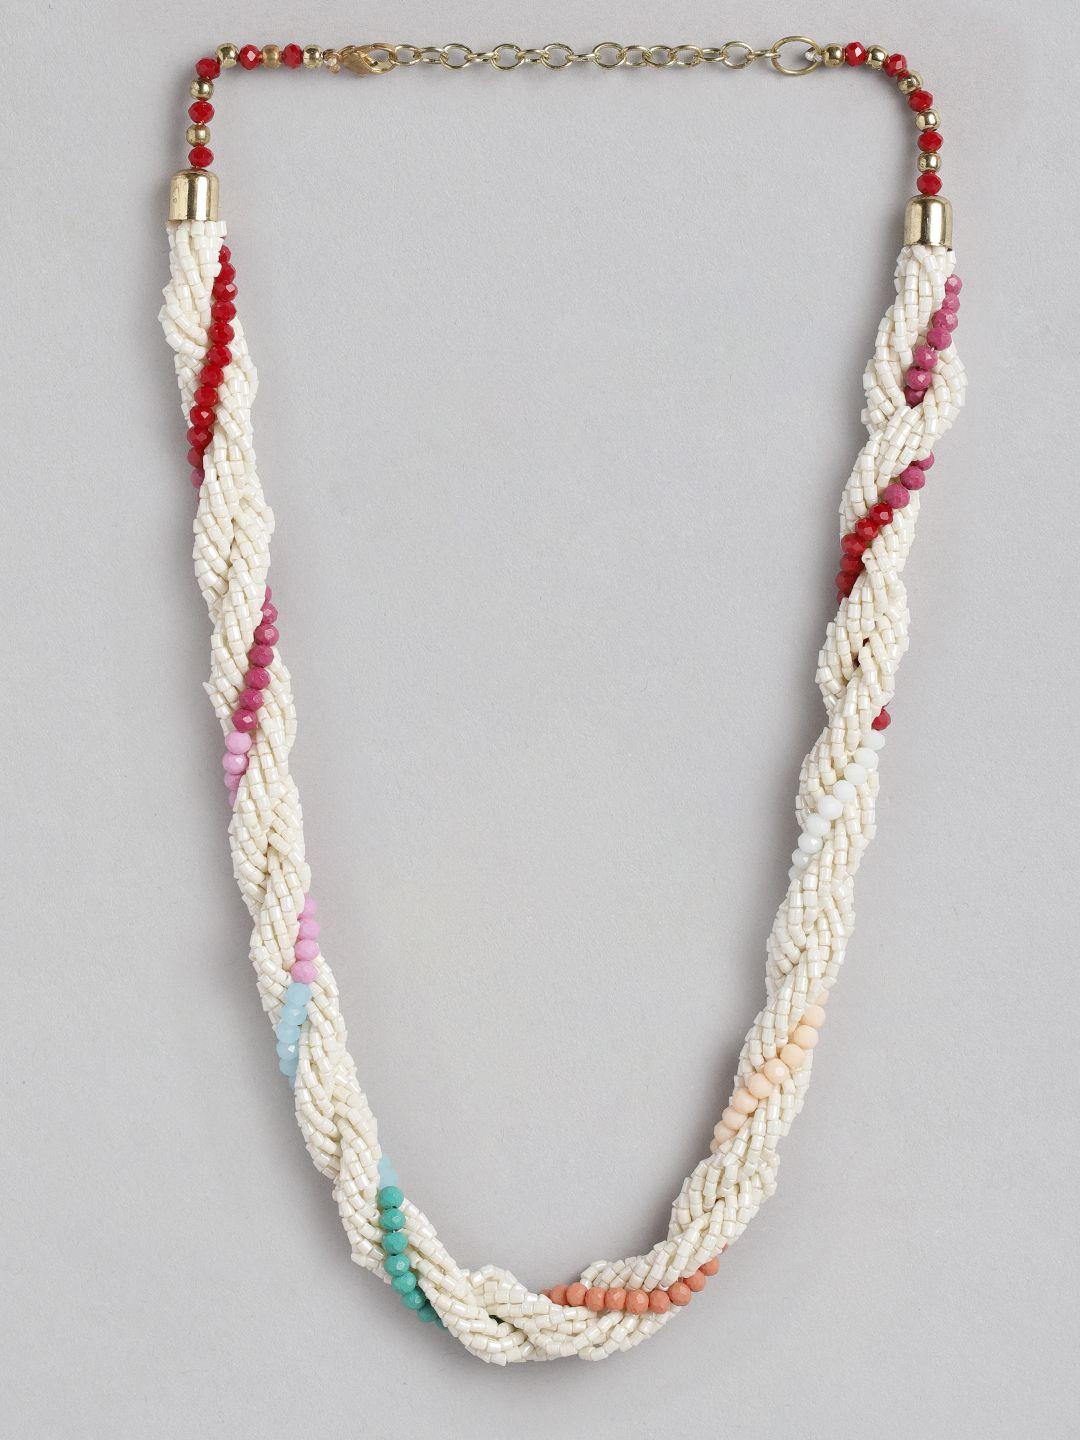 richeera white & red layered beaded necklace